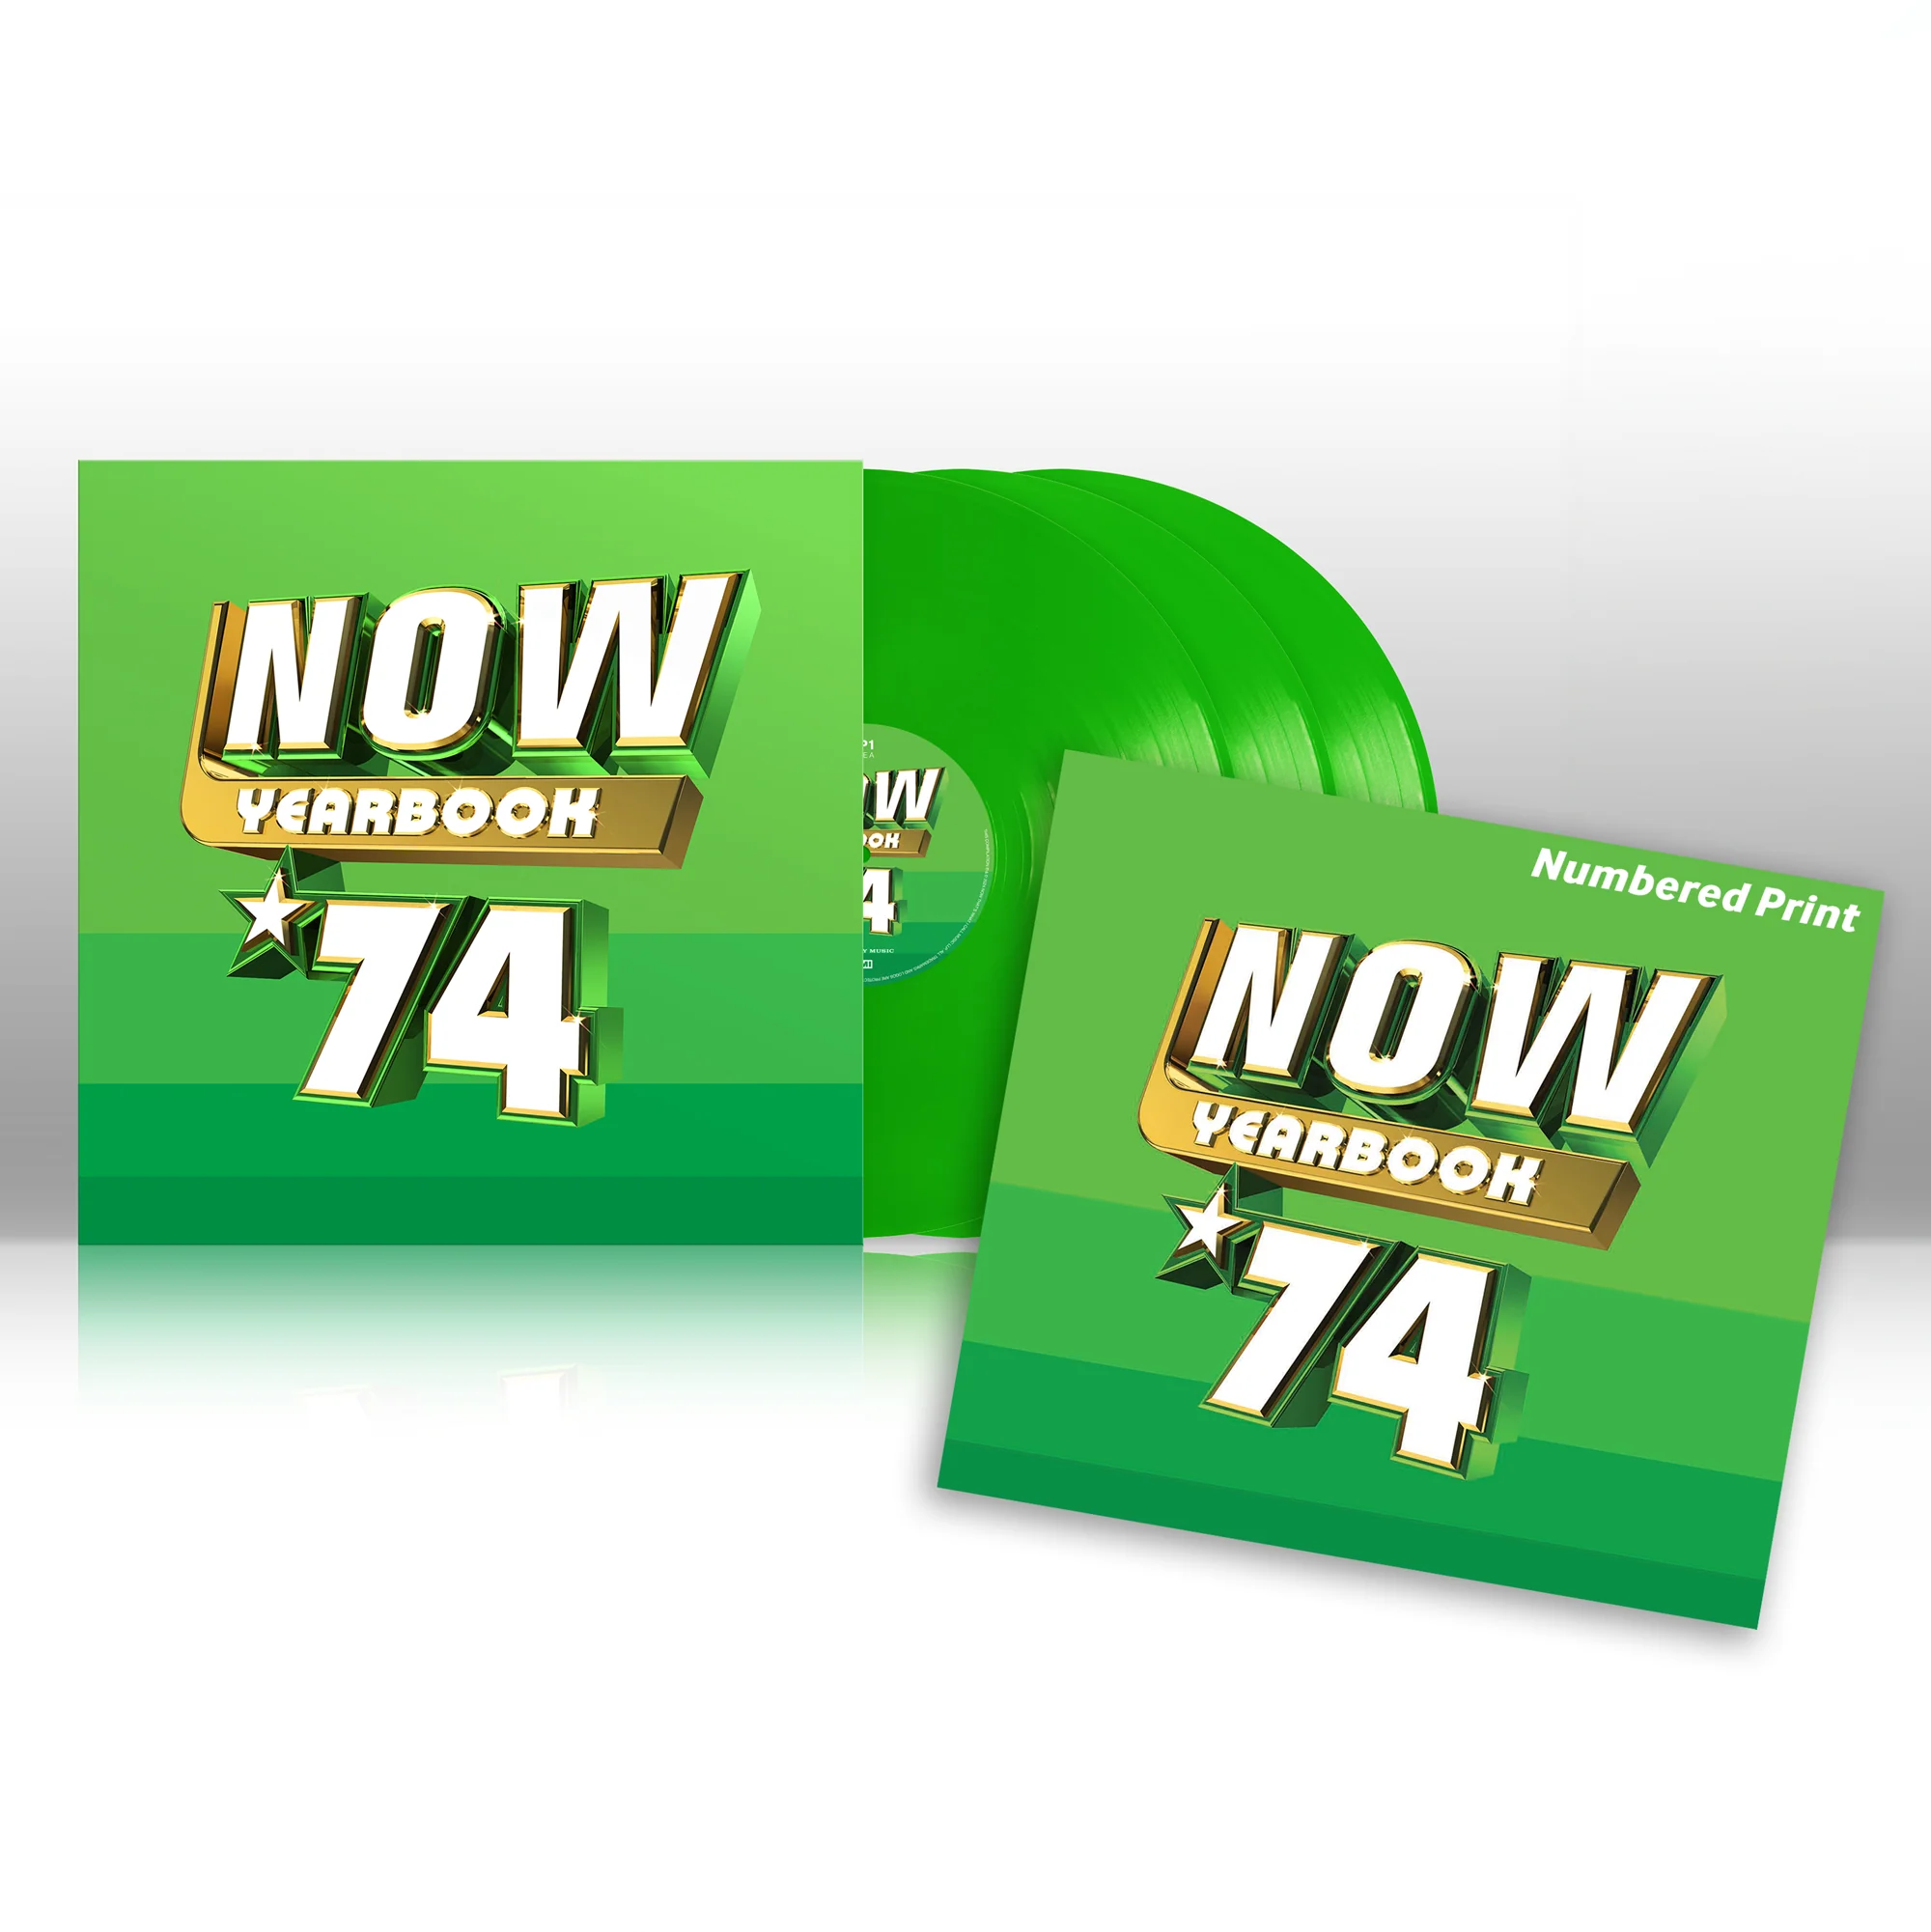 NOW – Yearbook 1974: Green Vinyl 3LP + Limited Numbered 12" Print